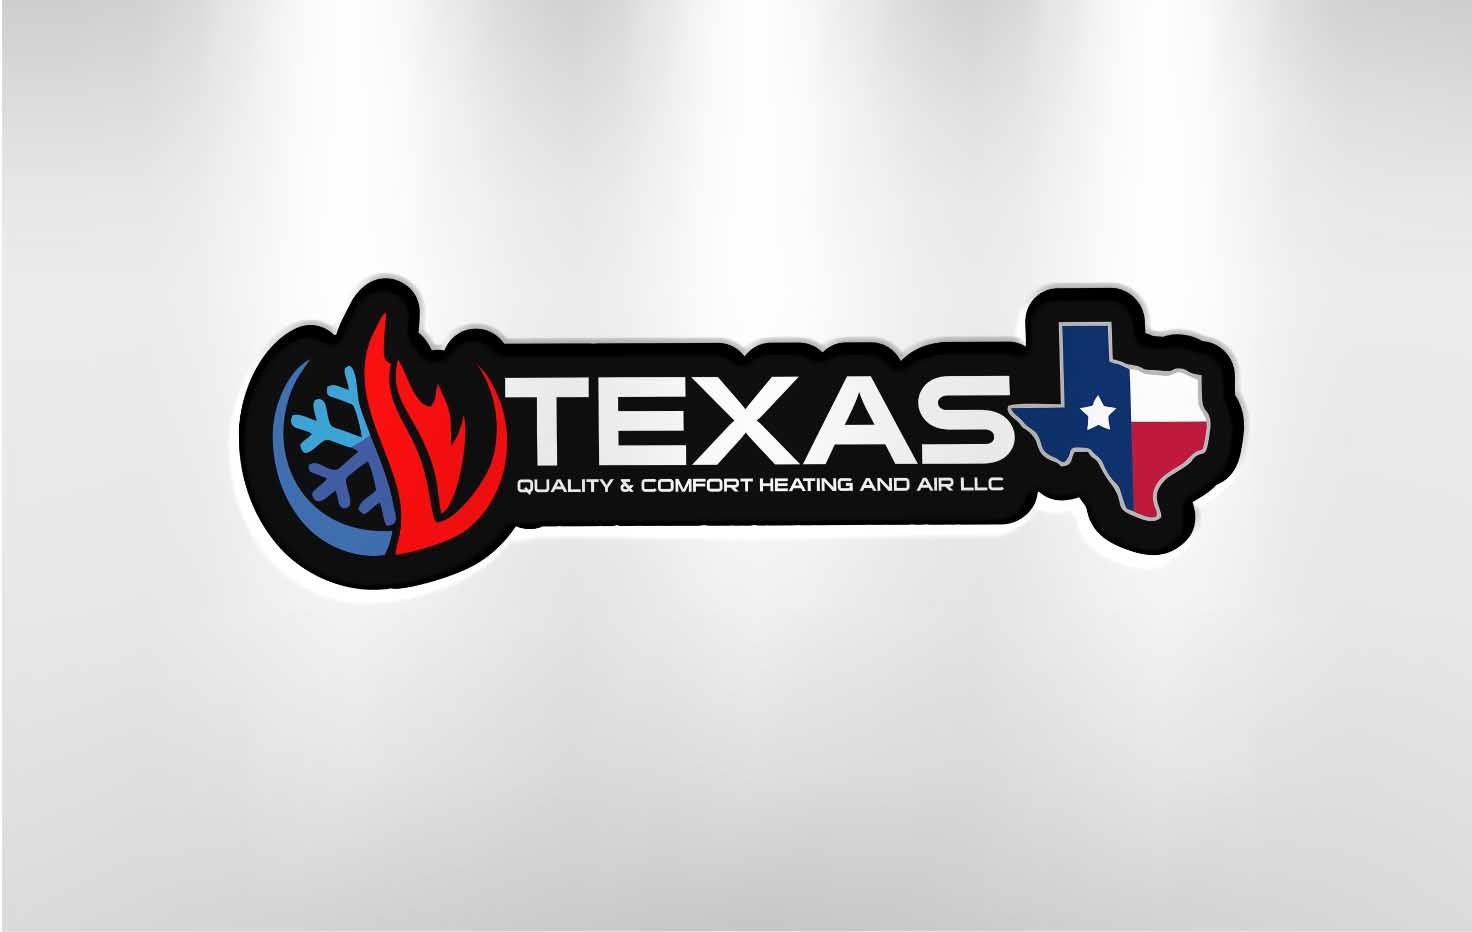 Texas Quality and Comfort Heating and Air Logo